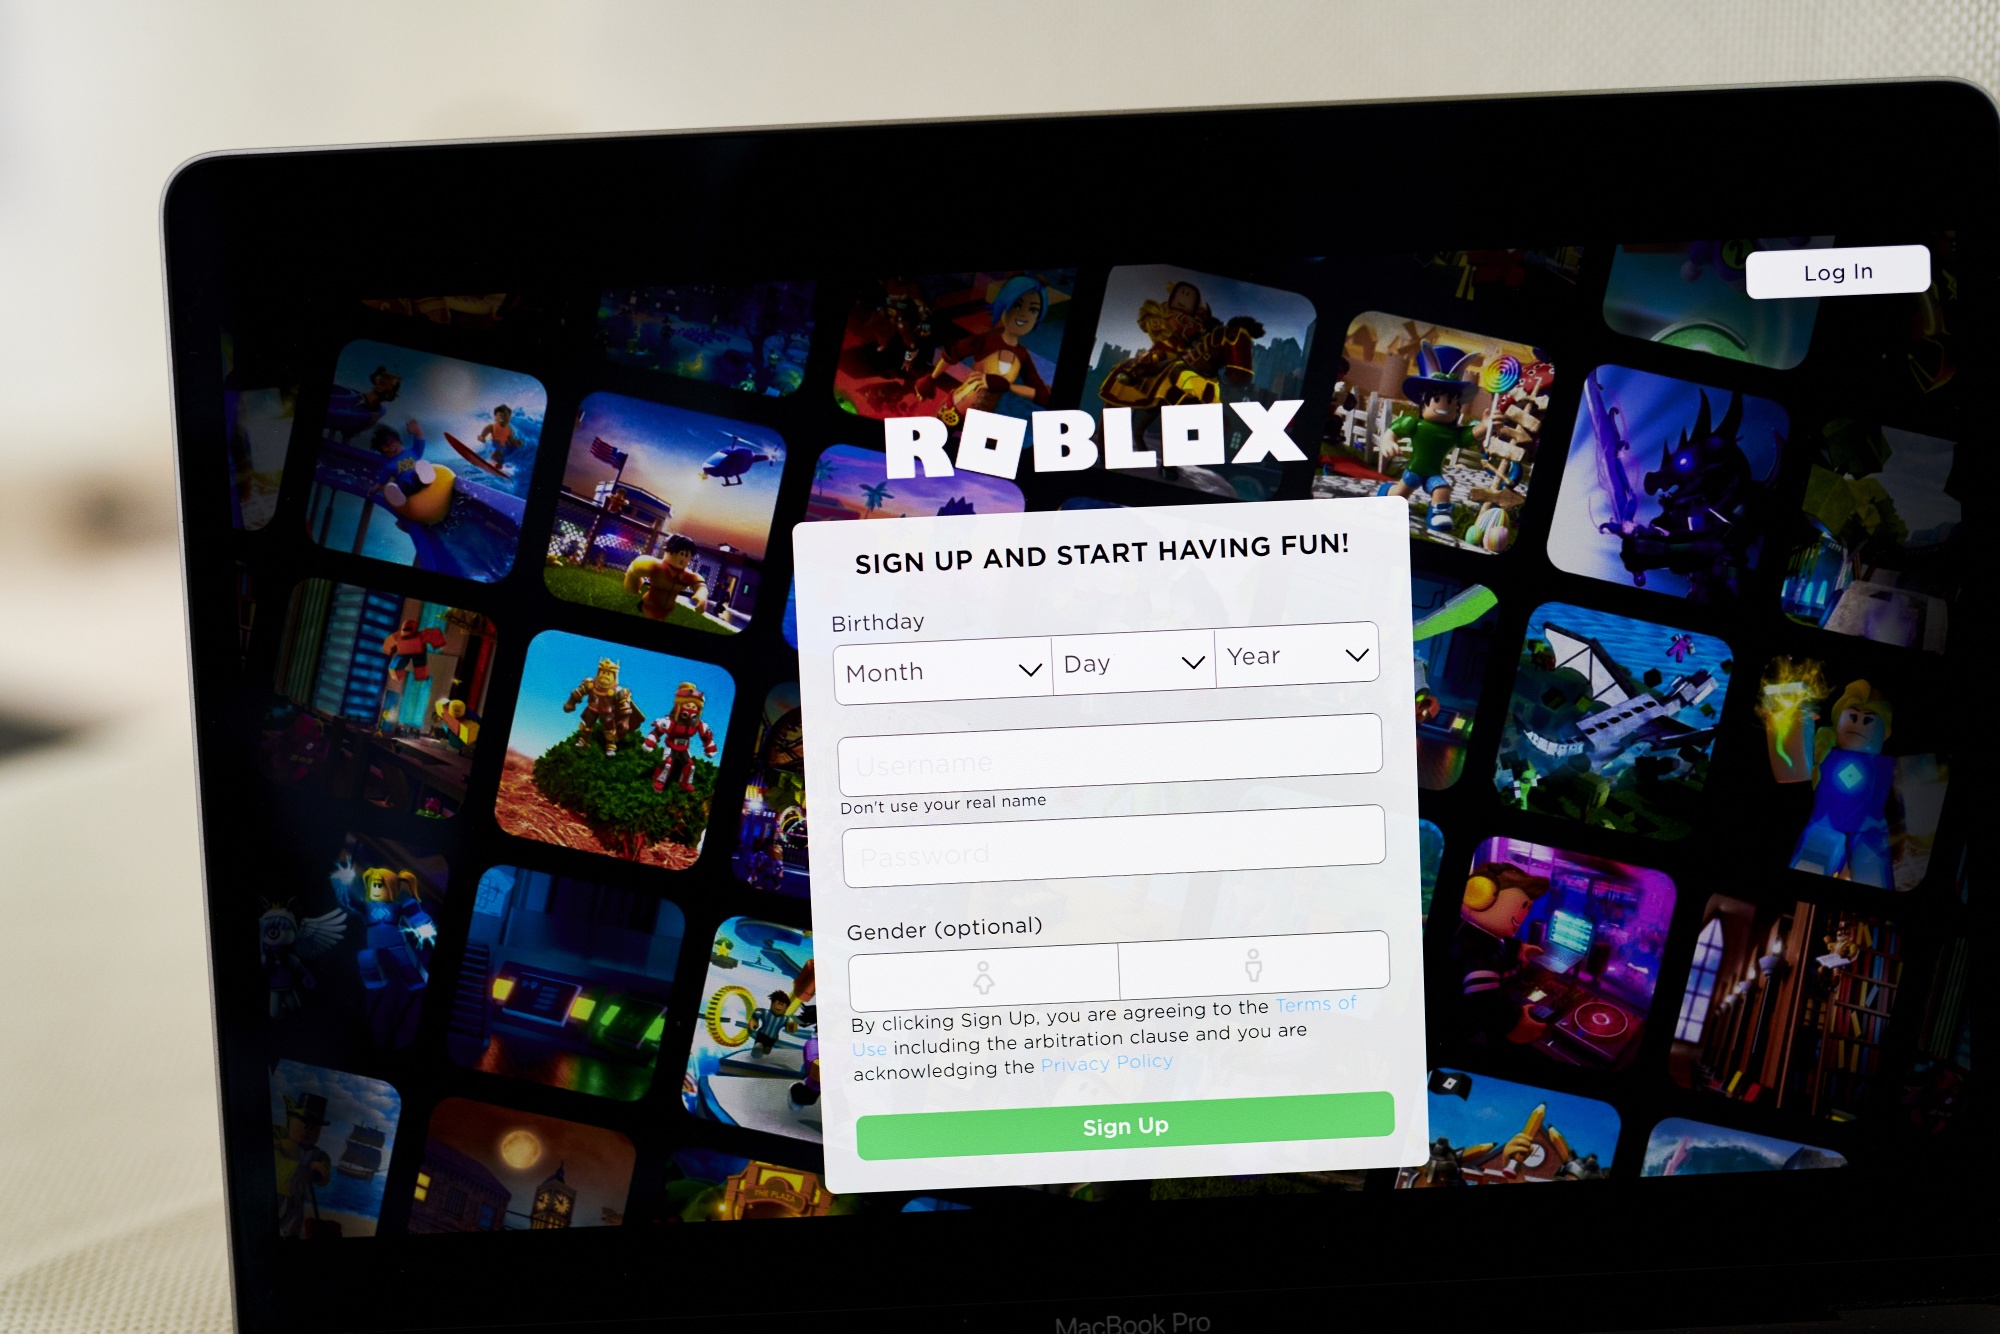 Roblox DOWN - Server status latest as thousands of fans are unable to login, Gaming, Entertainment